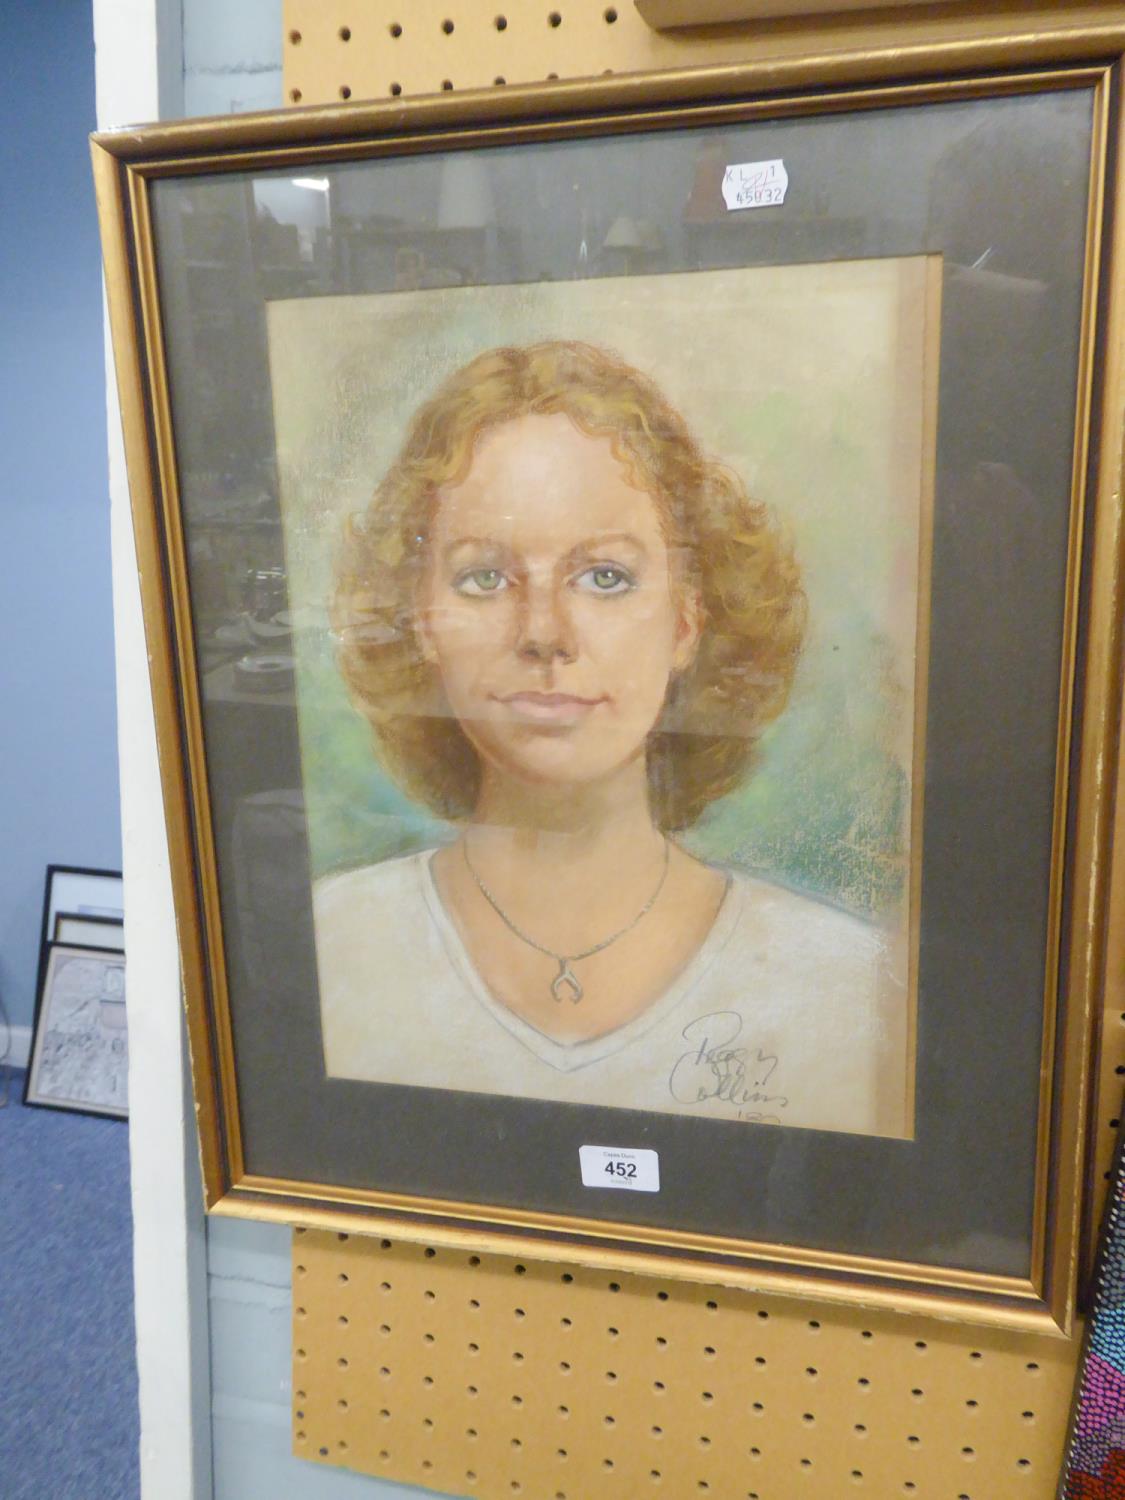 PEGGY COLLINS PASTEL DRAWING Portrait of a young woman Signed and dated (19) 80 15" x 11 1/2" (38.